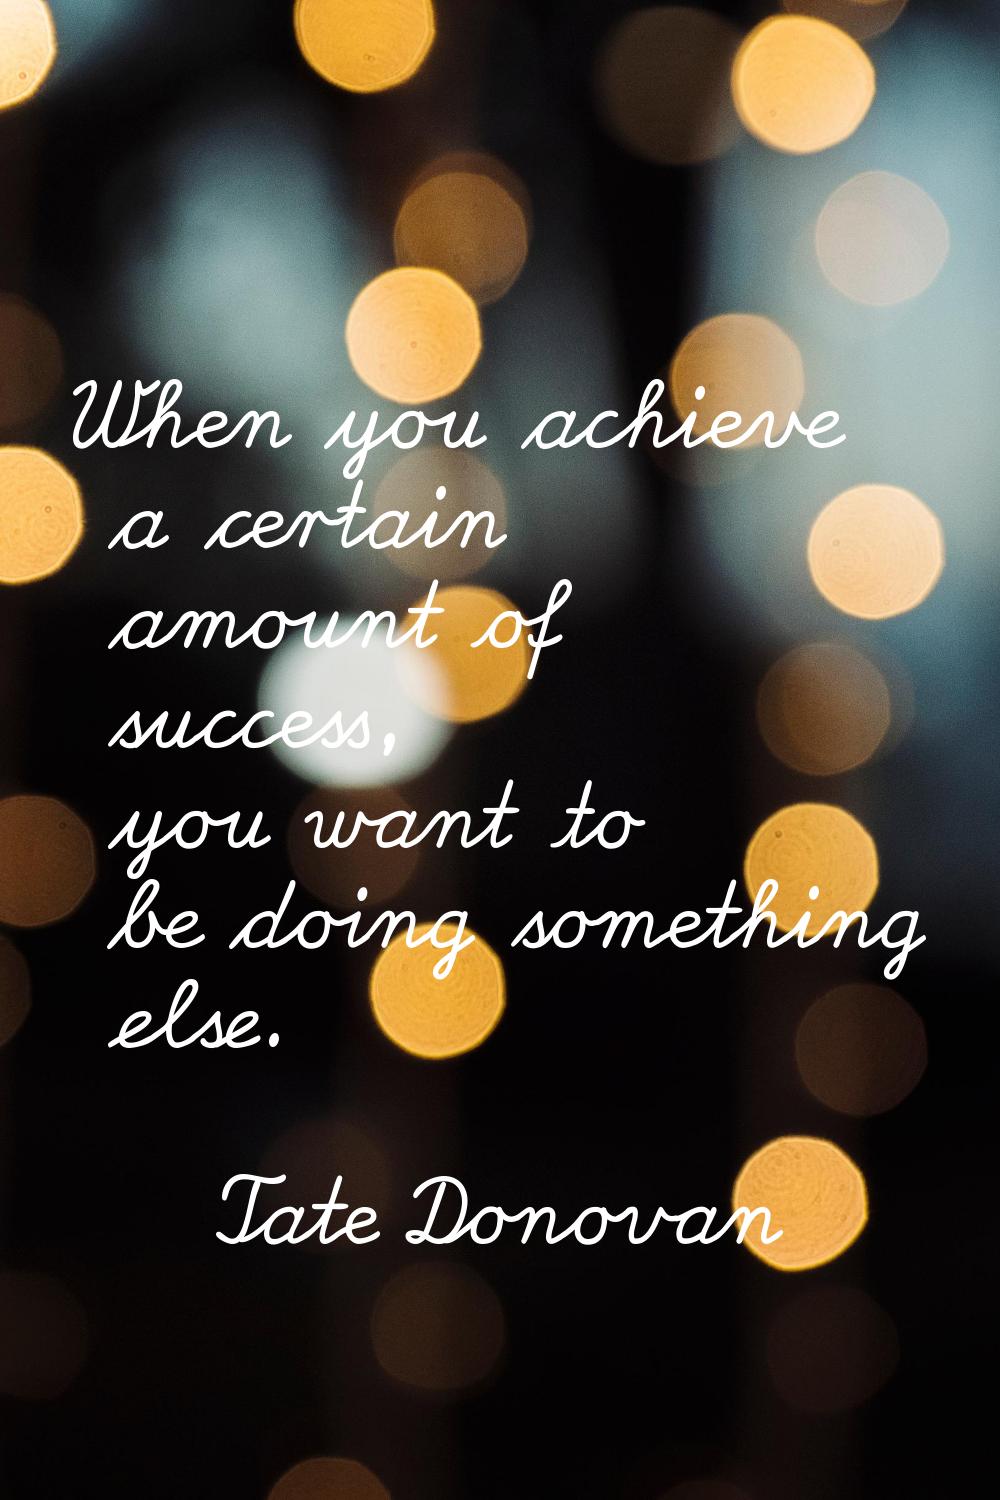 When you achieve a certain amount of success, you want to be doing something else.